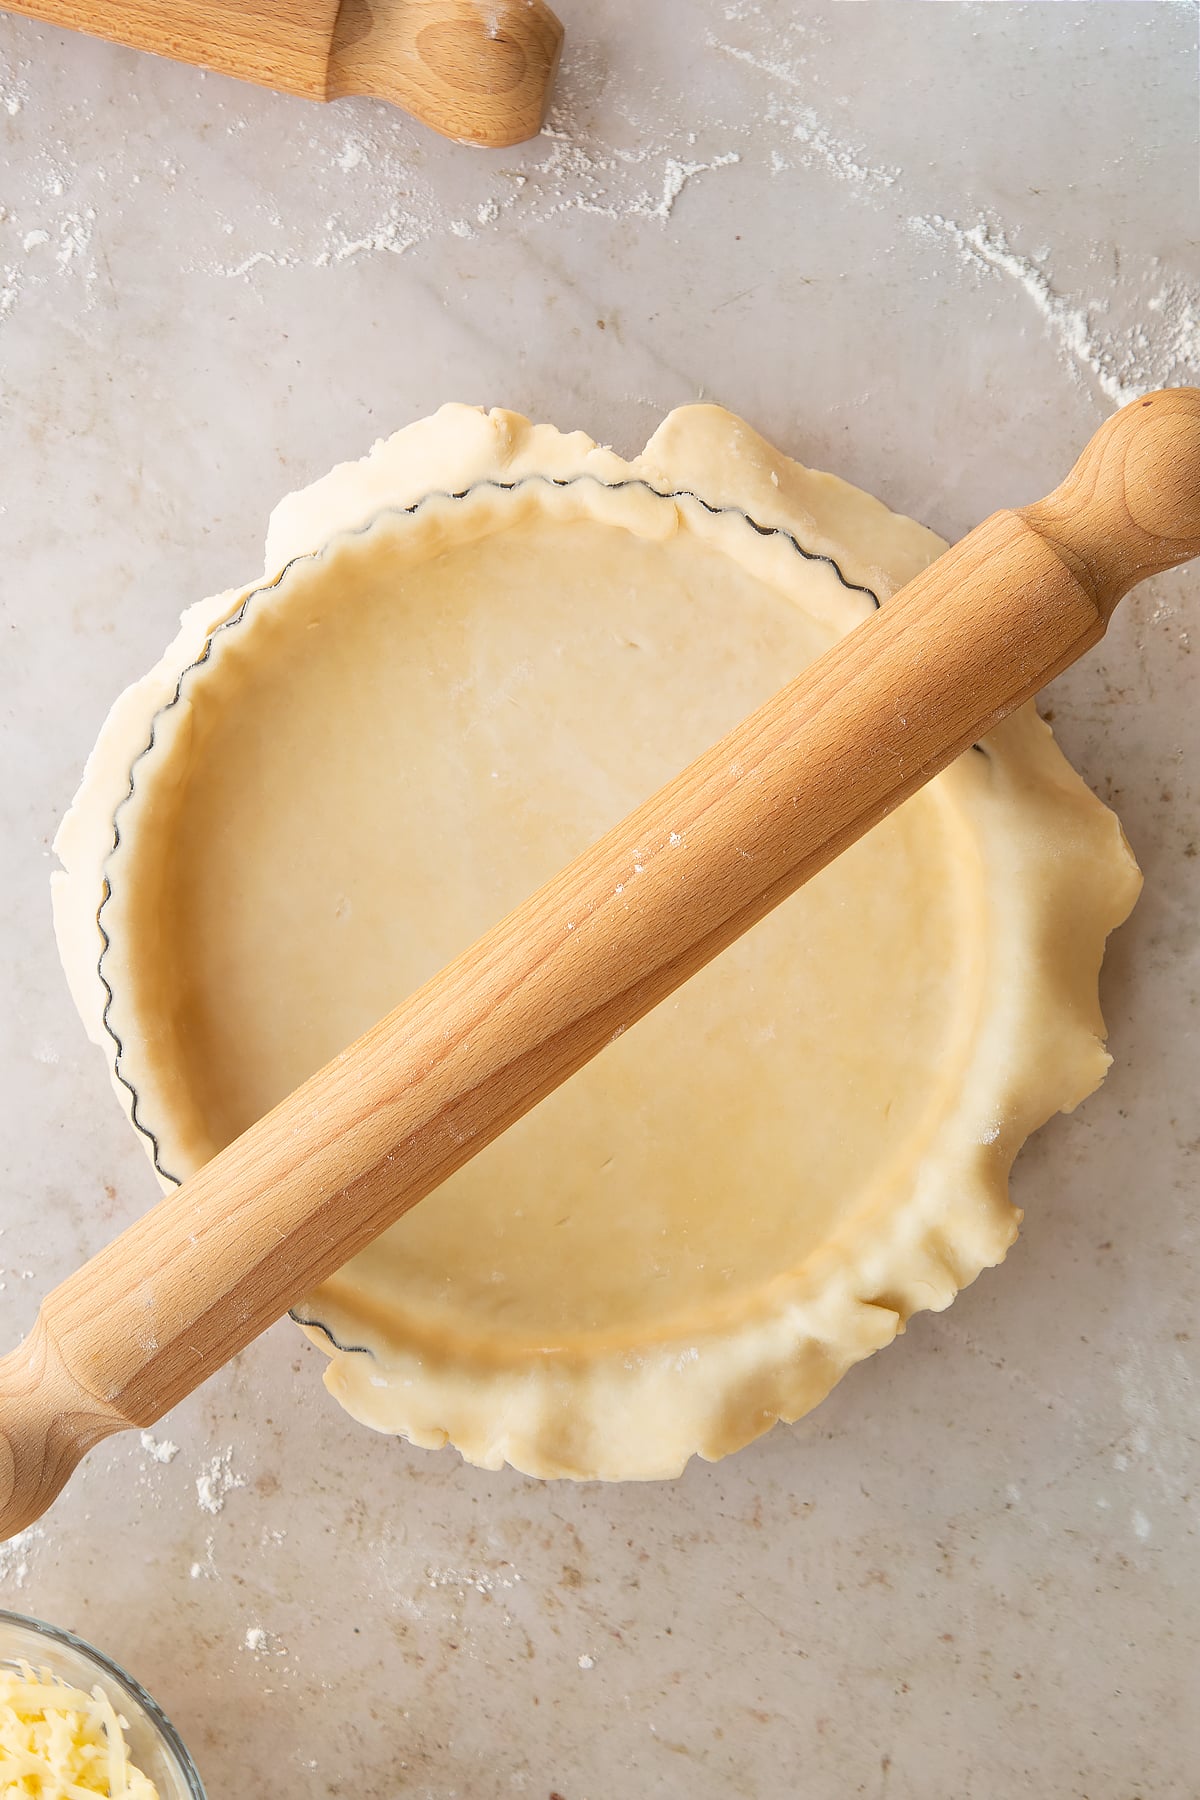 shortcrust pastry loosely put into a pie dish with a rolling pin rolling over the top.